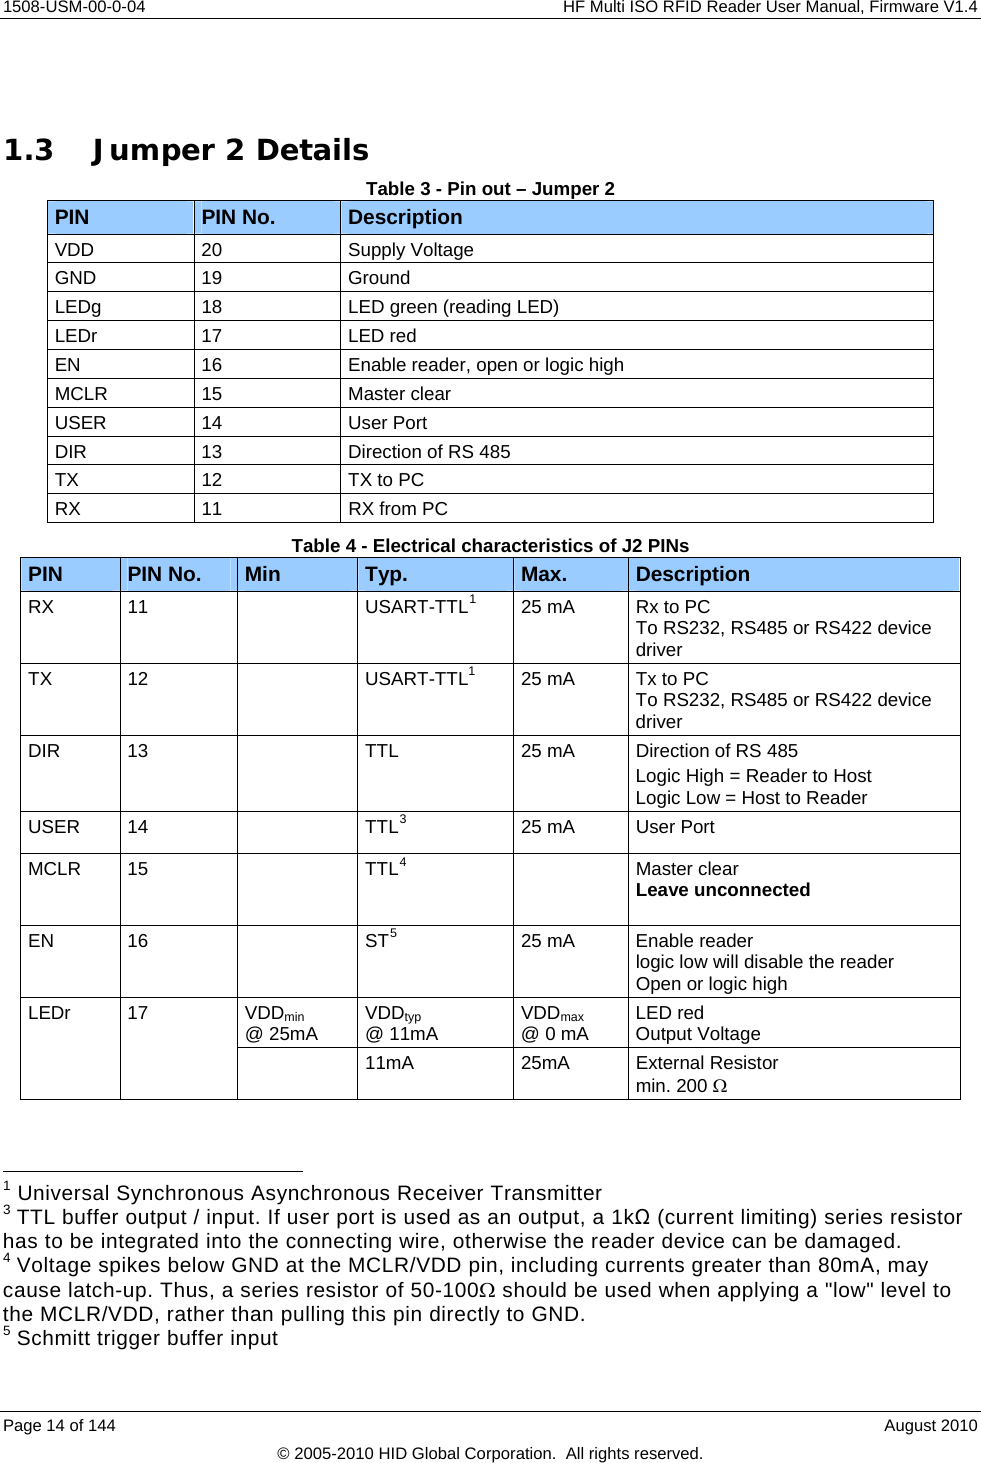     1508-USM-00-0-04    HF Multi ISO RFID Reader User Manual, Firmware V1.4 Page 14 of 144    August 2010 © 2005-2010 HID Global Corporation.  All rights reserved.  1.3 Jumper 2 Details Table 3 - Pin out – Jumper 2 PIN  PIN No.  Description VDD 20  Supply Voltage GND 19  Ground LEDg  18  LED green (reading LED) LEDr  17  LED red  EN  16  Enable reader, open or logic high MCLR 15  Master clear USER 14  User Port DIR  13  Direction of RS 485 TX  12  TX to PC RX  11  RX from PC Table 4 - Electrical characteristics of J2 PINs PIN  PIN No.  Min  Typ.  Max.  Description RX 11   USART-TTL1  25 mA  Rx to PC To RS232, RS485 or RS422 device driver TX 12   USART-TTL1  25 mA  Tx to PC To RS232, RS485 or RS422 device driver DIR 13   TTL  25 mA  Direction of RS 485 Logic High = Reader to Host Logic Low = Host to Reader USER 14   TTL3  25 mA  User Port MCLR 15   TTL4  Master clear Leave unconnected  EN 16   ST5  25 mA  Enable reader logic low will disable the reader Open or logic high VDDmin @ 25mA  VDDtyp @ 11mA  VDDmax @ 0 mA  LED red Output Voltage LEDr 17  11mA 25mA External Resistor min. 200                                                        1 Universal Synchronous Asynchronous Receiver Transmitter 3 TTL buffer output / input. If user port is used as an output, a 1kΩ (current limiting) series resistor has to be integrated into the connecting wire, otherwise the reader device can be damaged. 4 Voltage spikes below GND at the MCLR/VDD pin, including currents greater than 80mA, may cause latch-up. Thus, a series resistor of 50-100 should be used when applying a &quot;low&quot; level to the MCLR/VDD, rather than pulling this pin directly to GND. 5 Schmitt trigger buffer input 